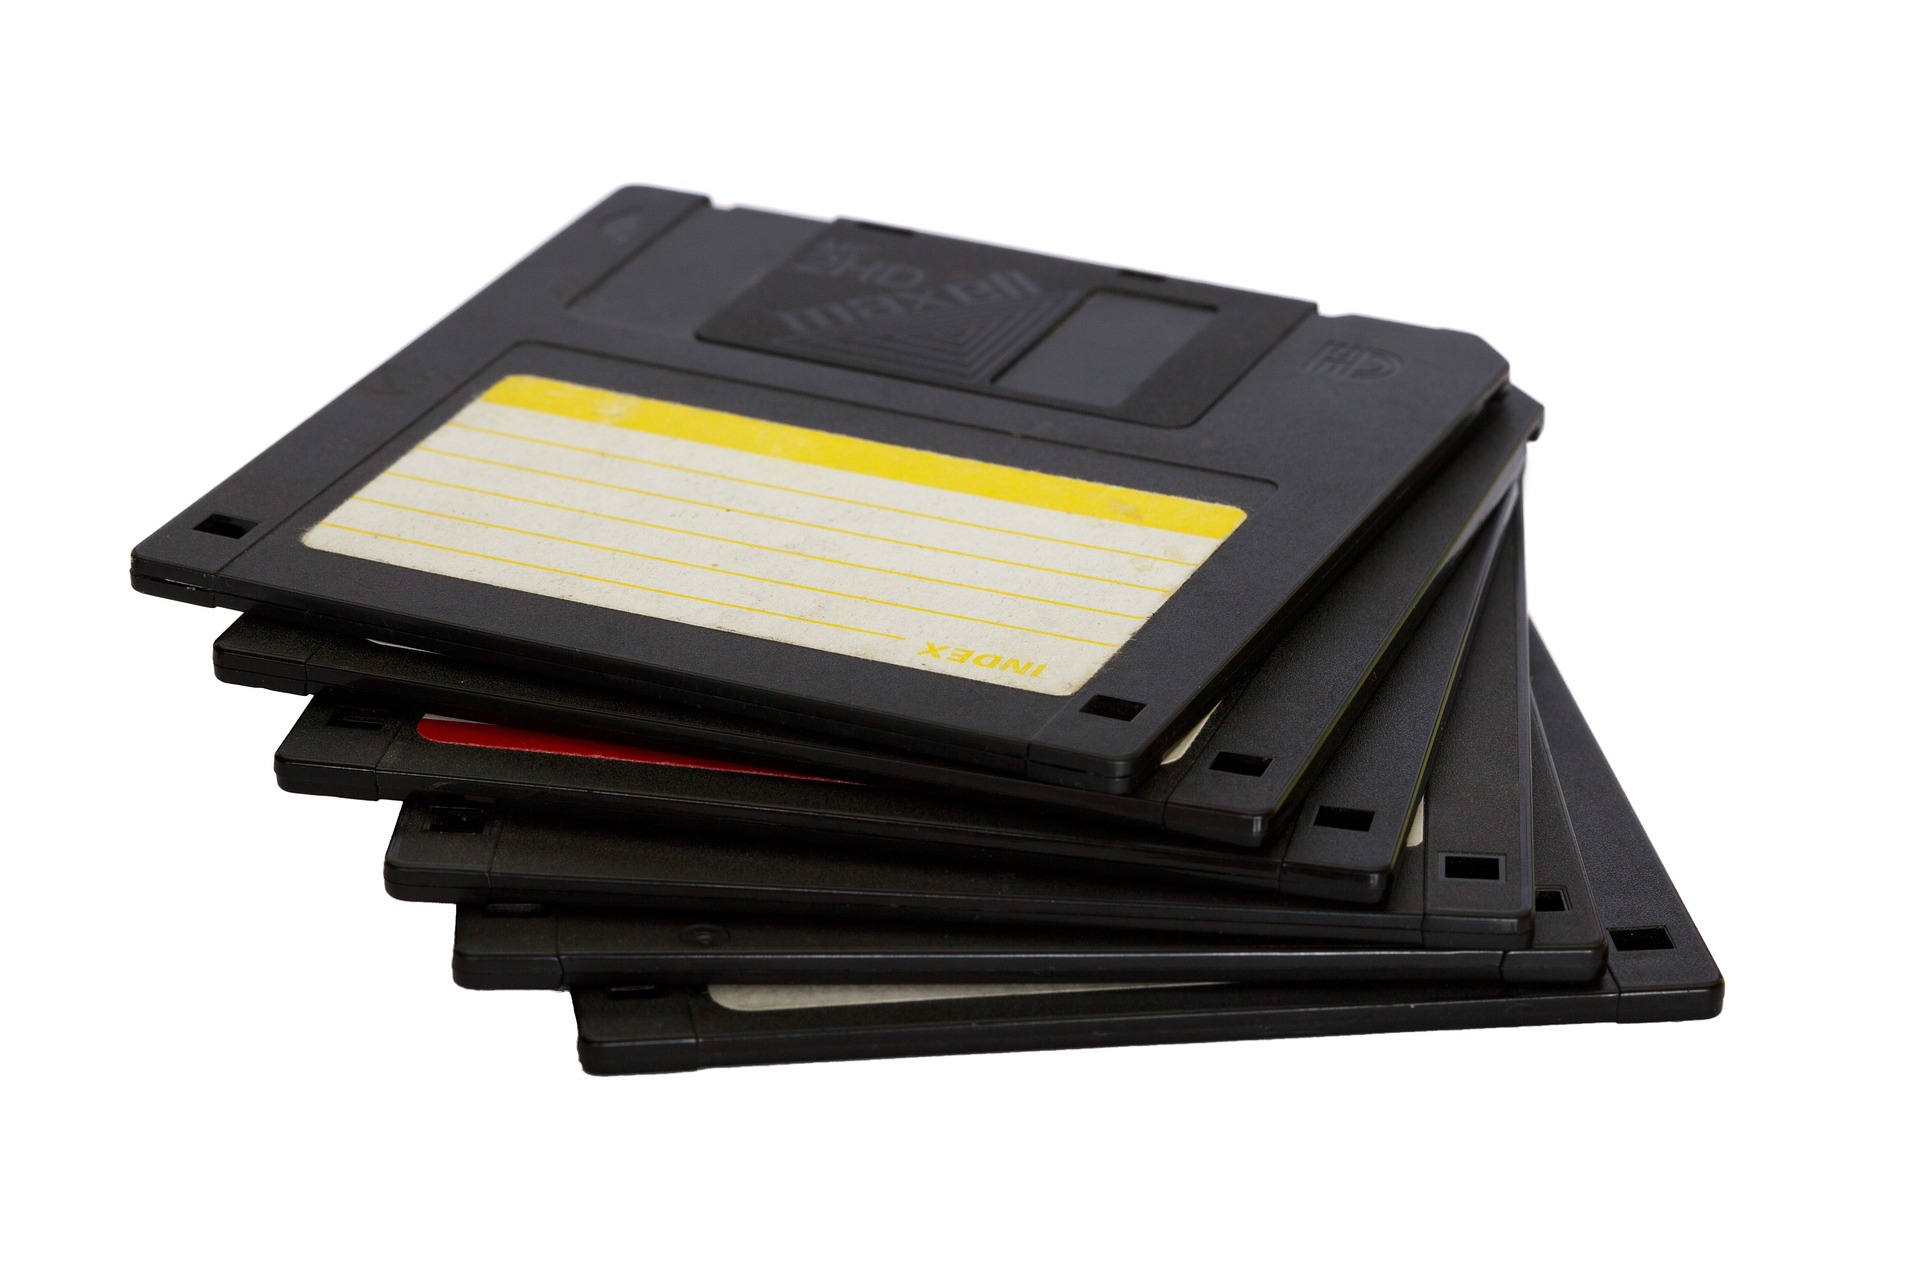 Understanding the Magic of Magnetic Floppy Disks